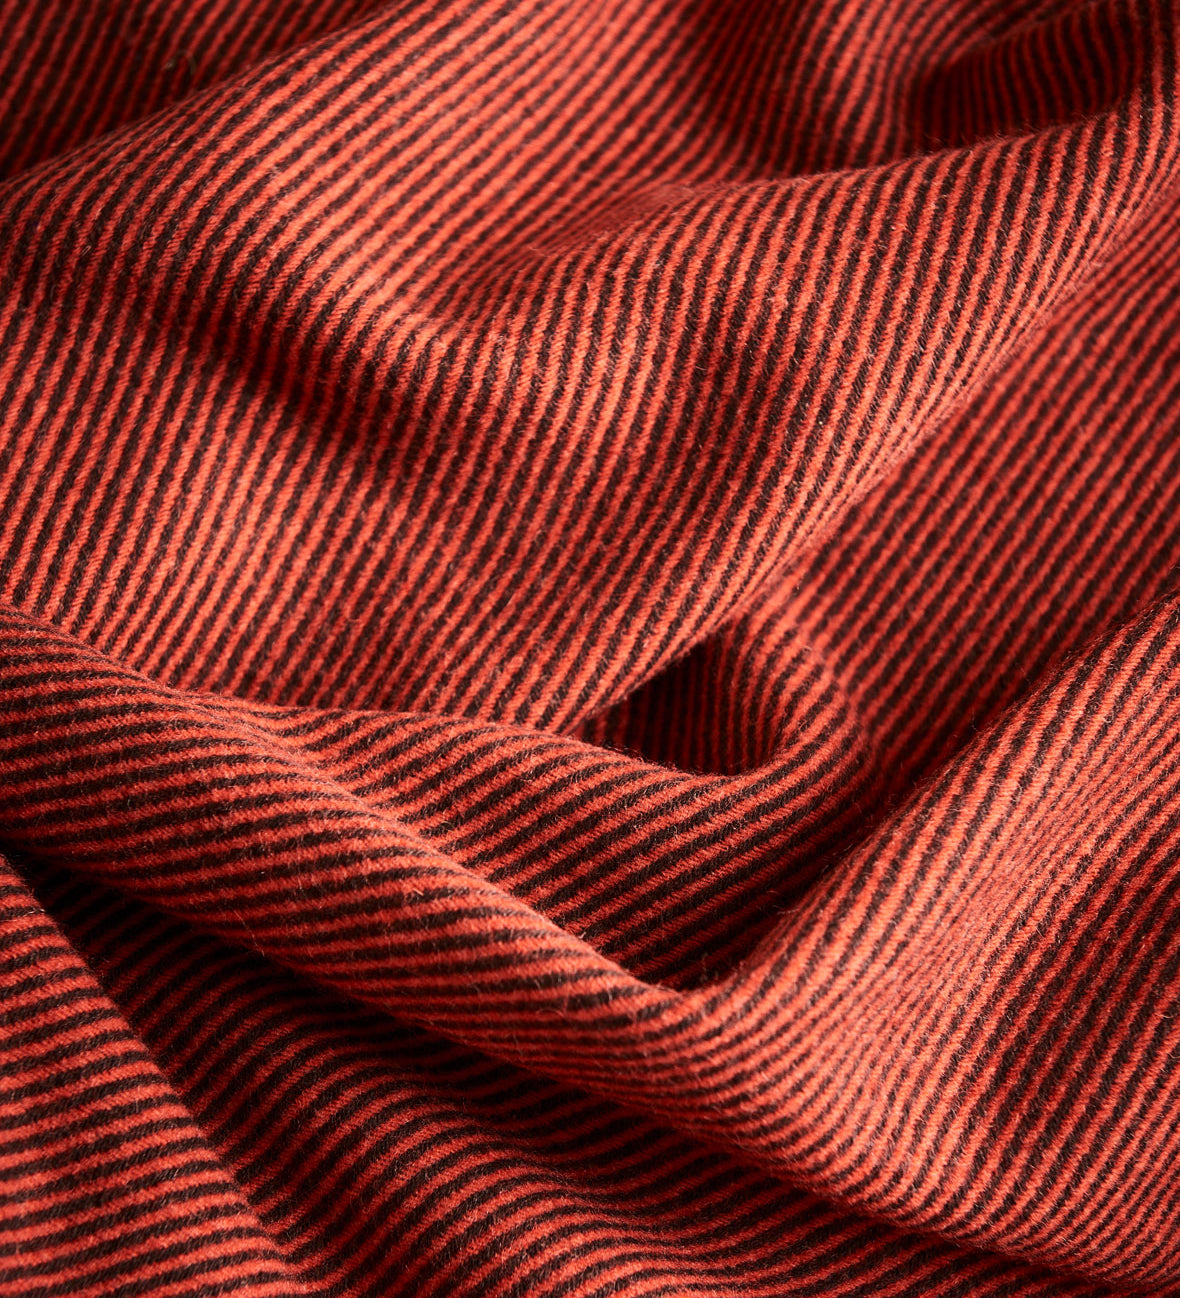 A close up of a diagonal throw in umber showing the drape of the fabric.